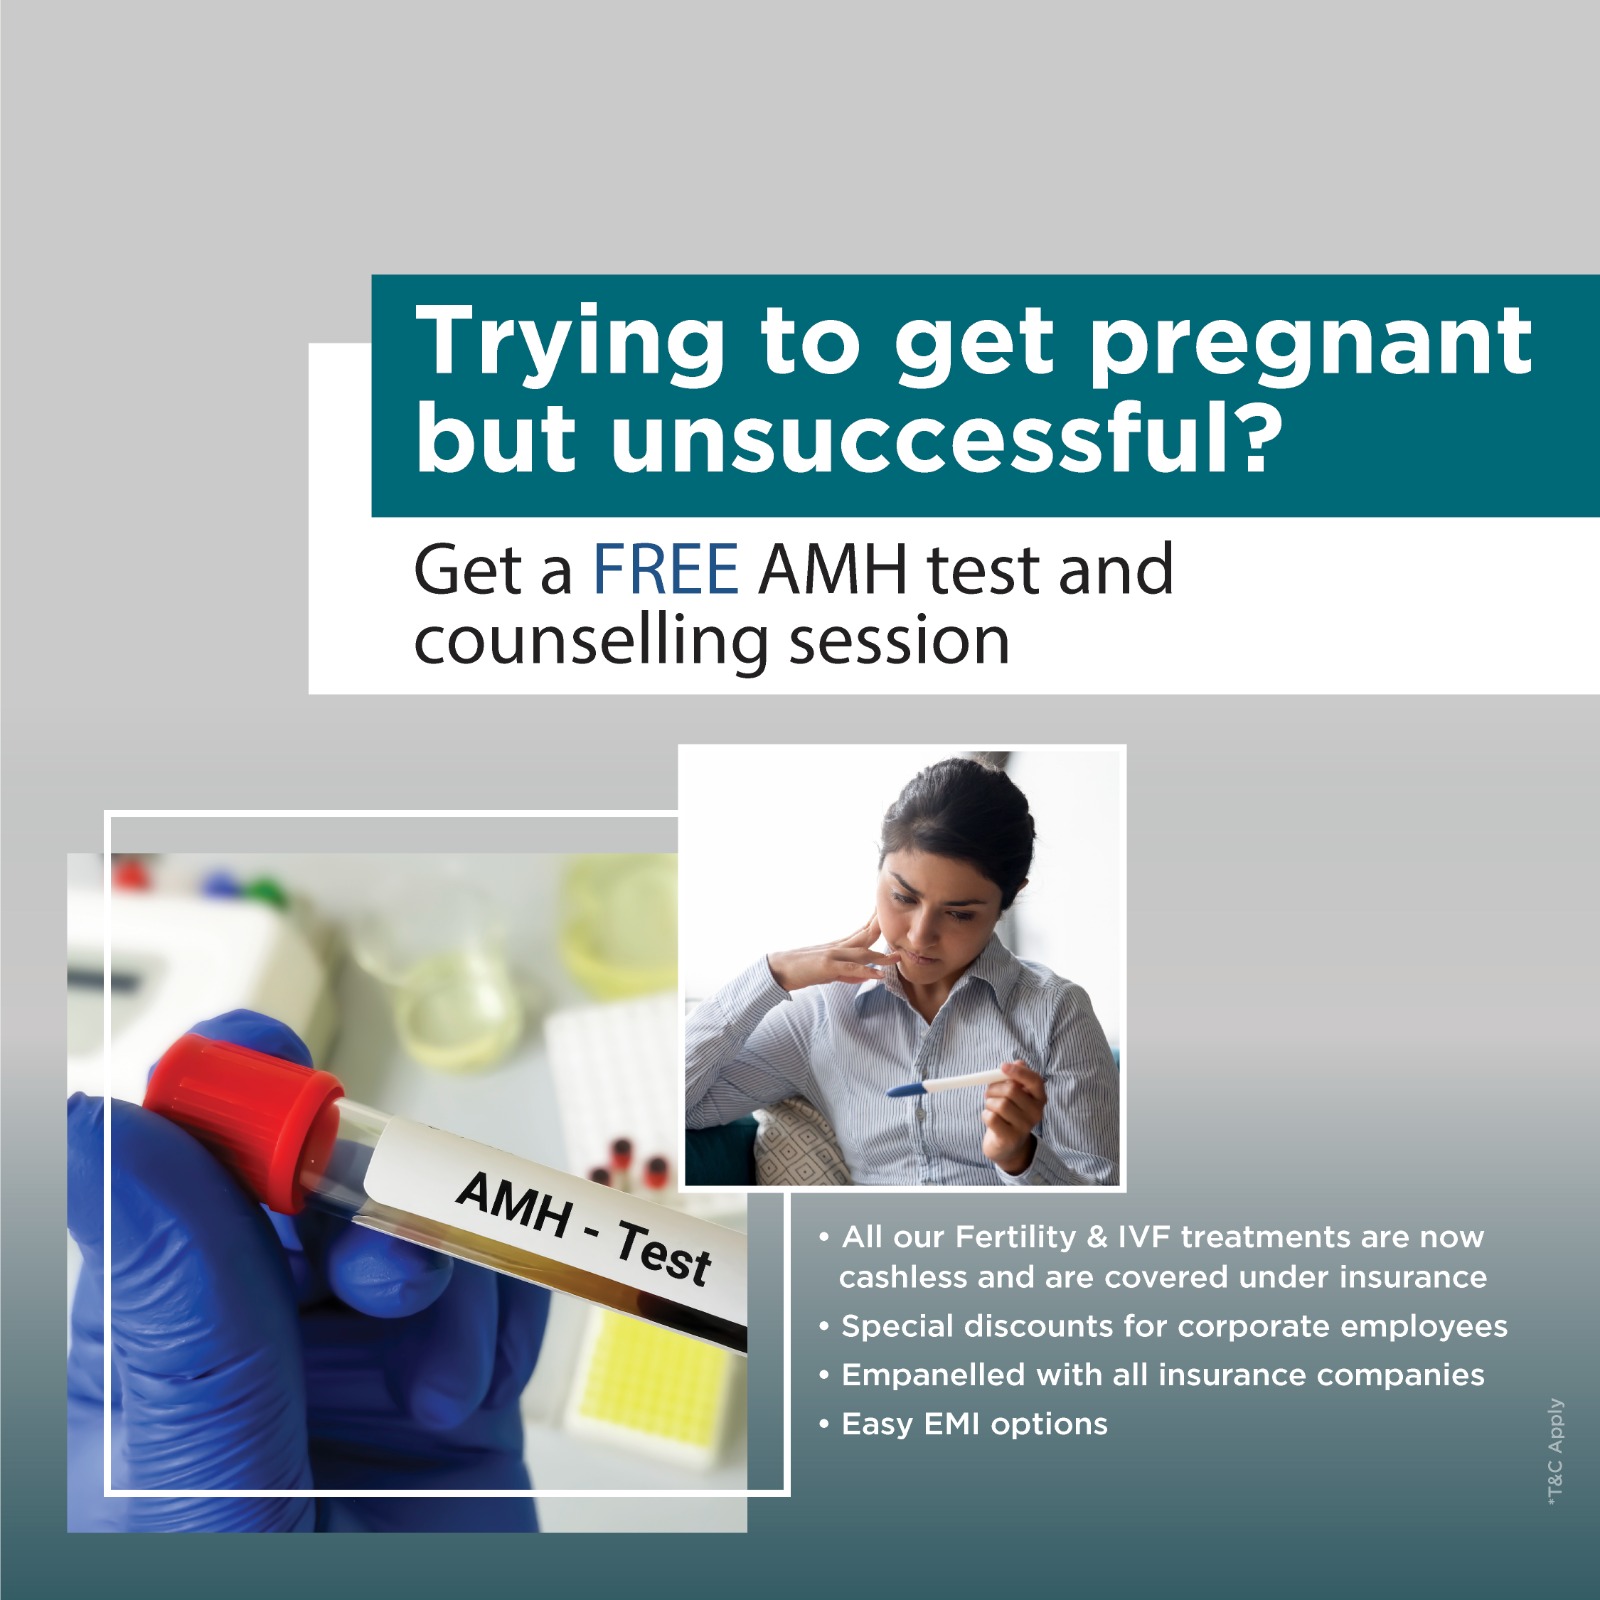 Book AMH test with free counseling sessions in Bangalore - Motherhood Fertility and IVF Centers.